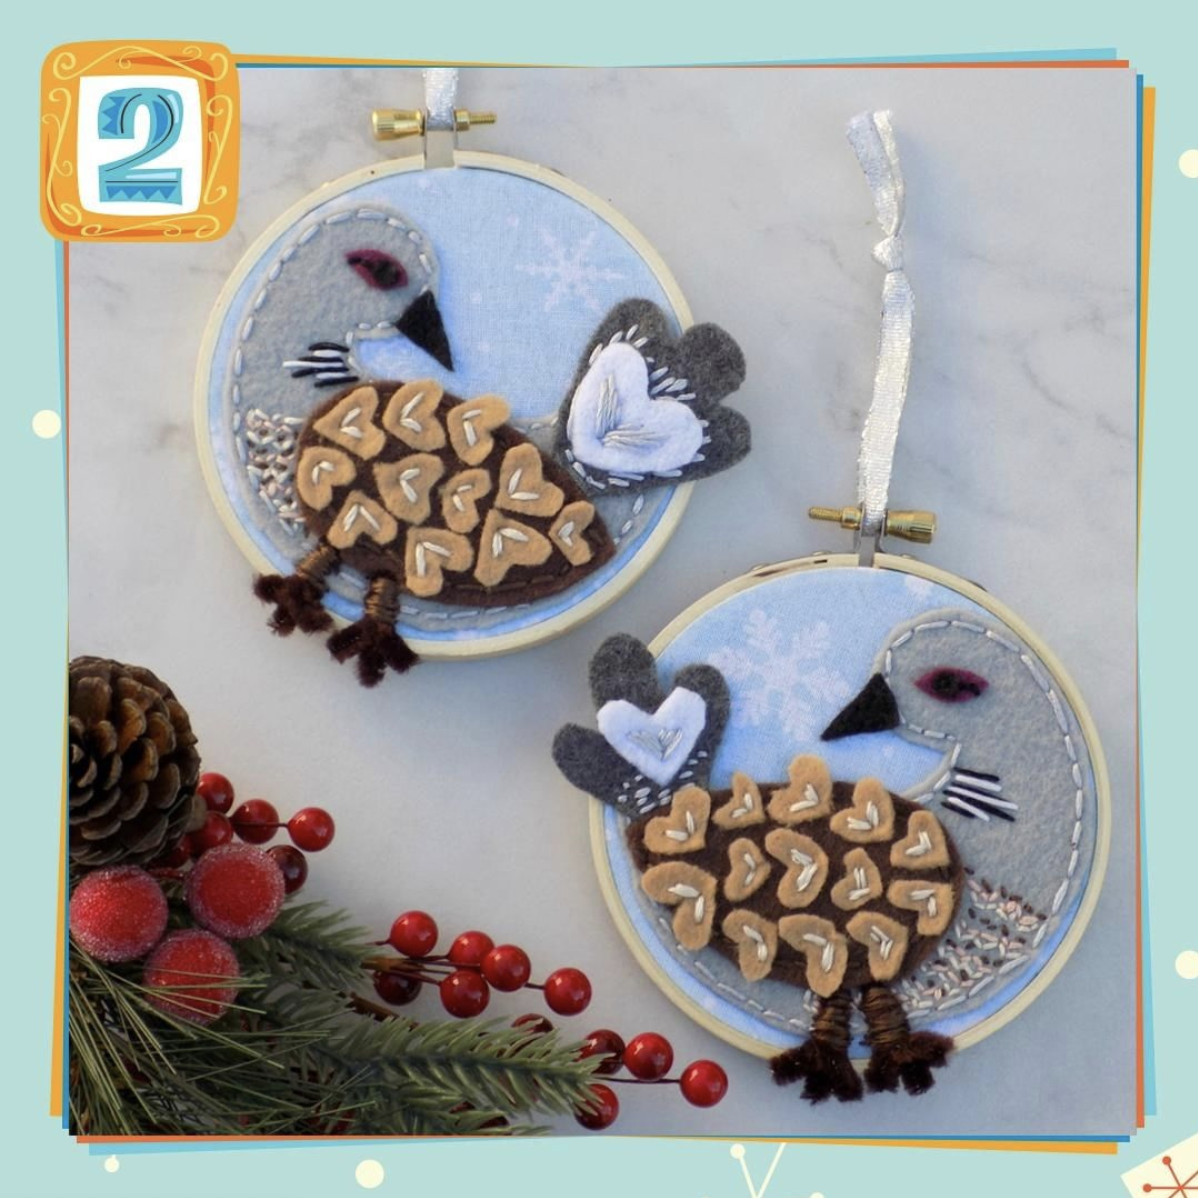 🎵On the 2nd day of Christmas 🎵…@onesavvymom put a #DIY spin on the #ChristmasPriceIndex. This year, two turtle doves cost $375. But why buy them when you can make these Turtle Dove Ornaments?